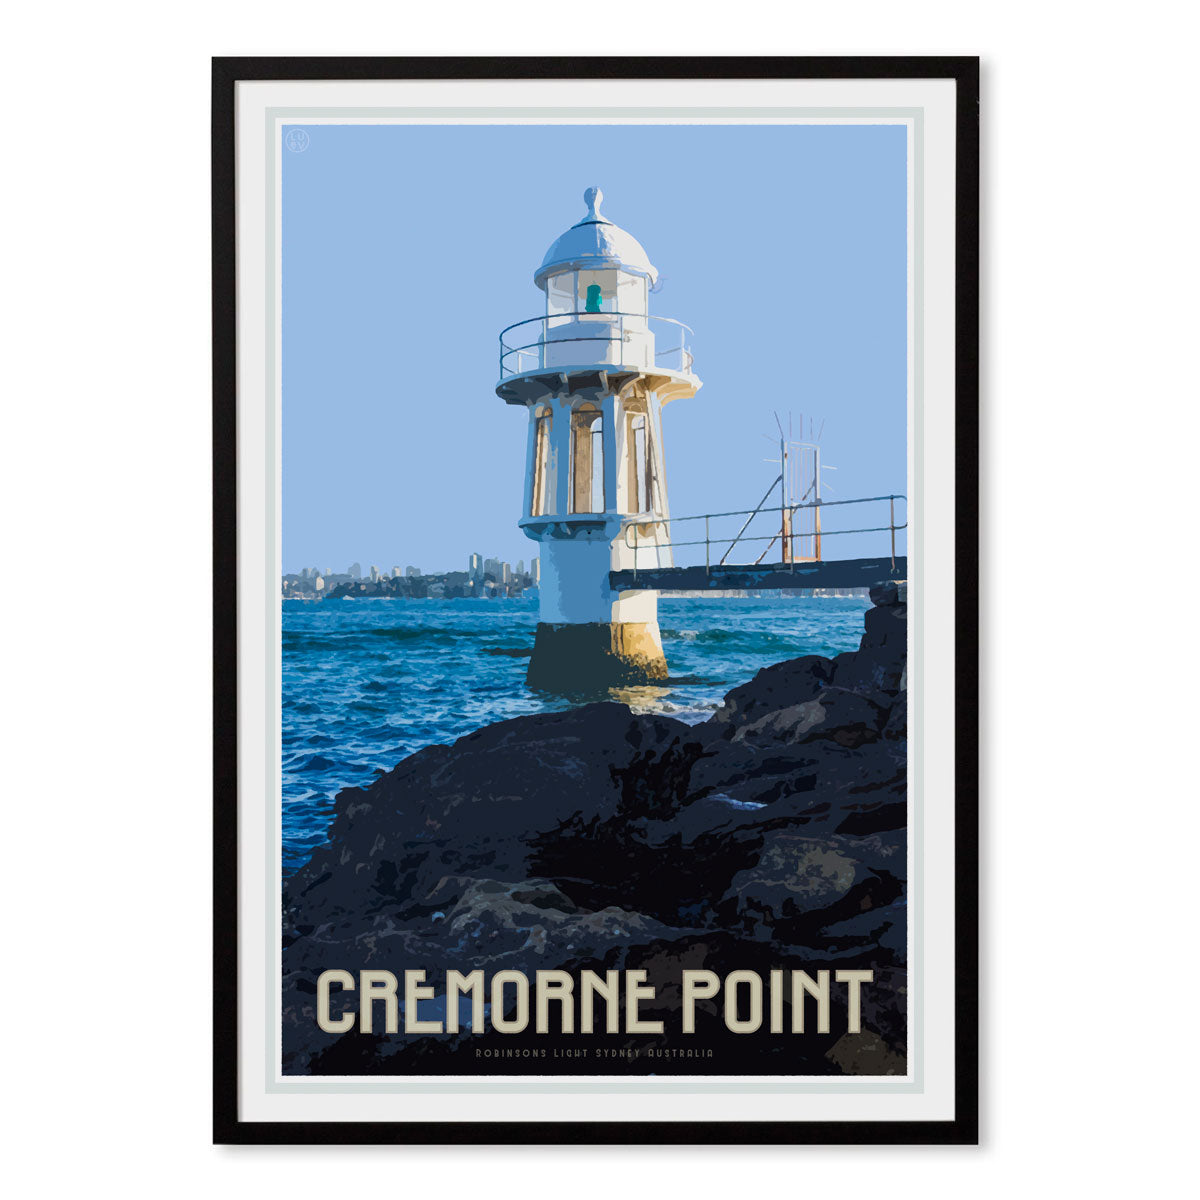 Cremorne point vintage style travel framed print by Places We Luv